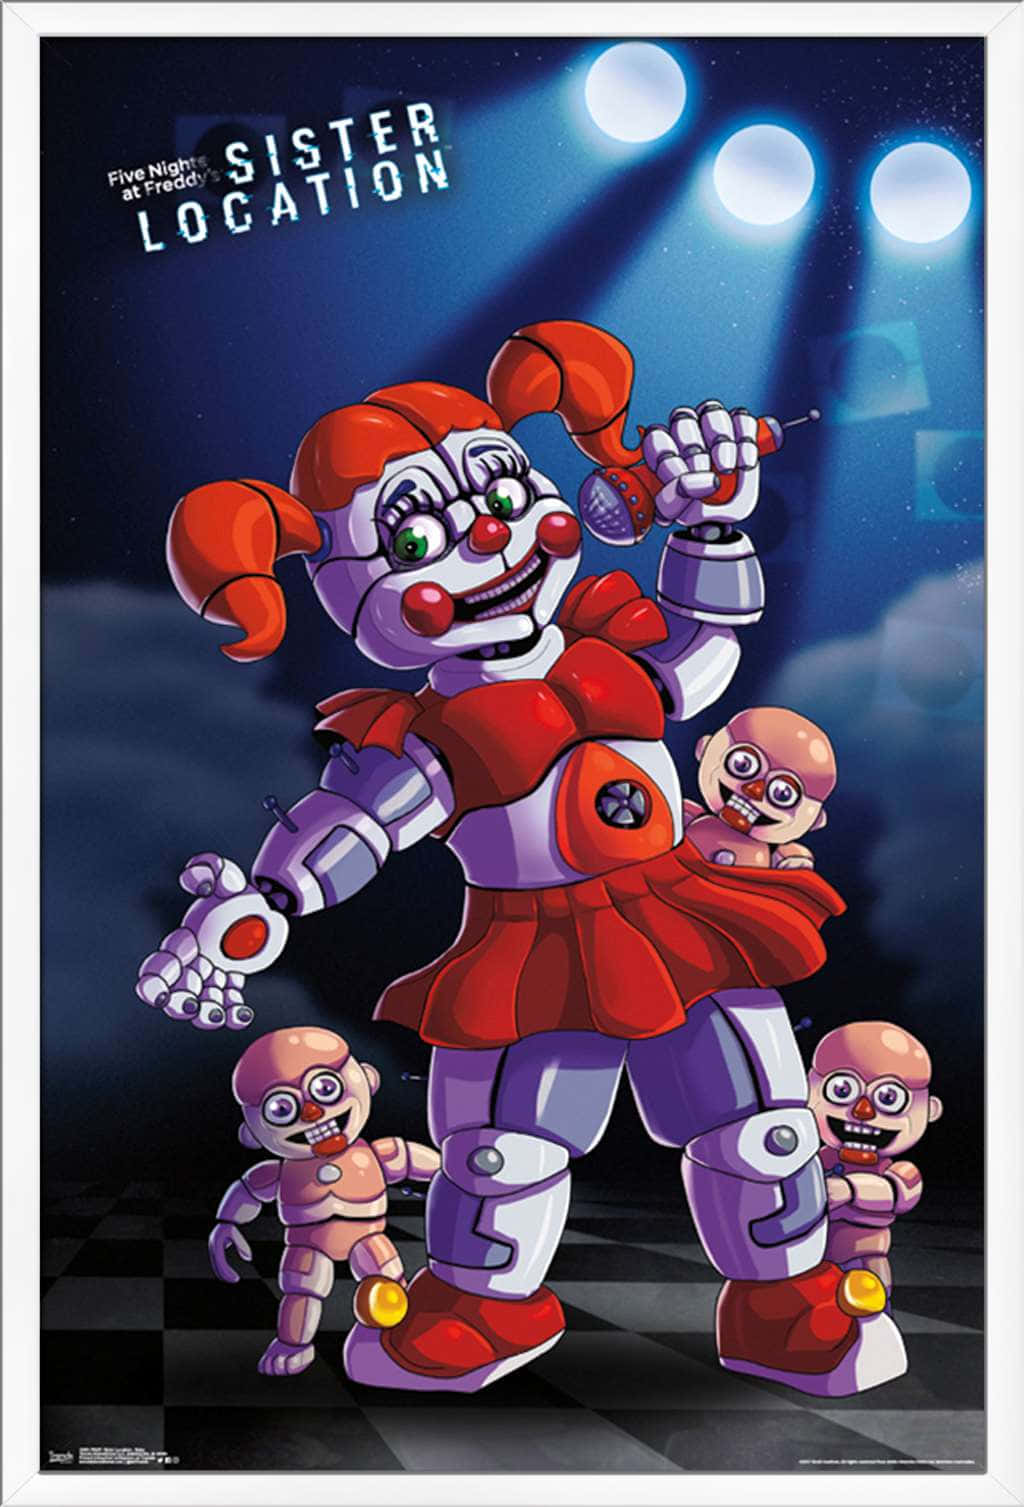 Five Nights At Freddy's - Sister Location Poster Wallpaper